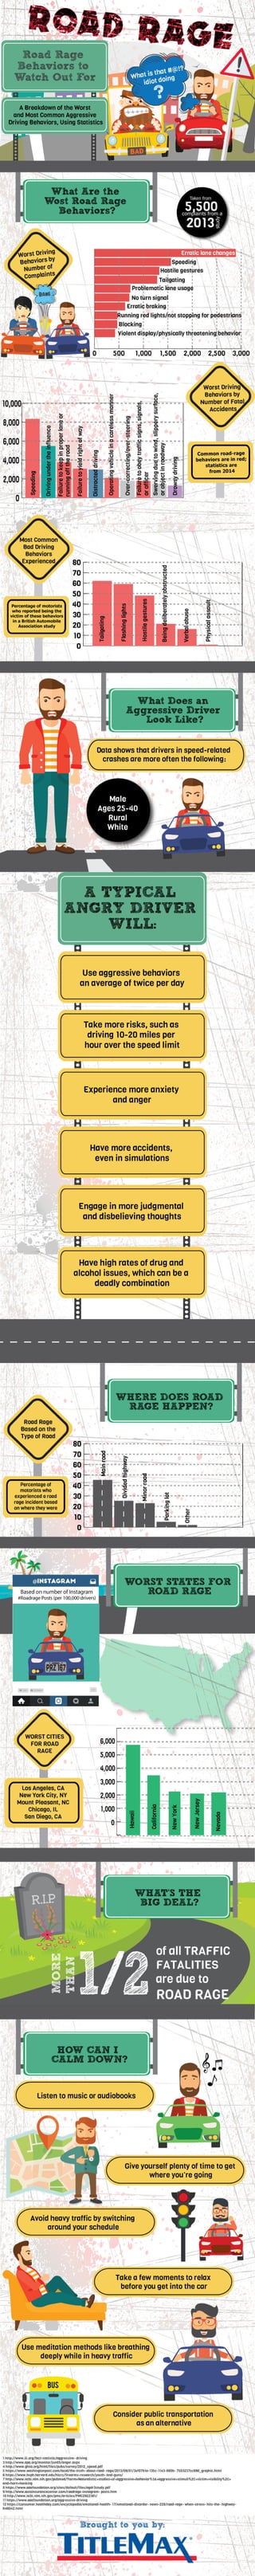 All ABout Road Rage Behaviors